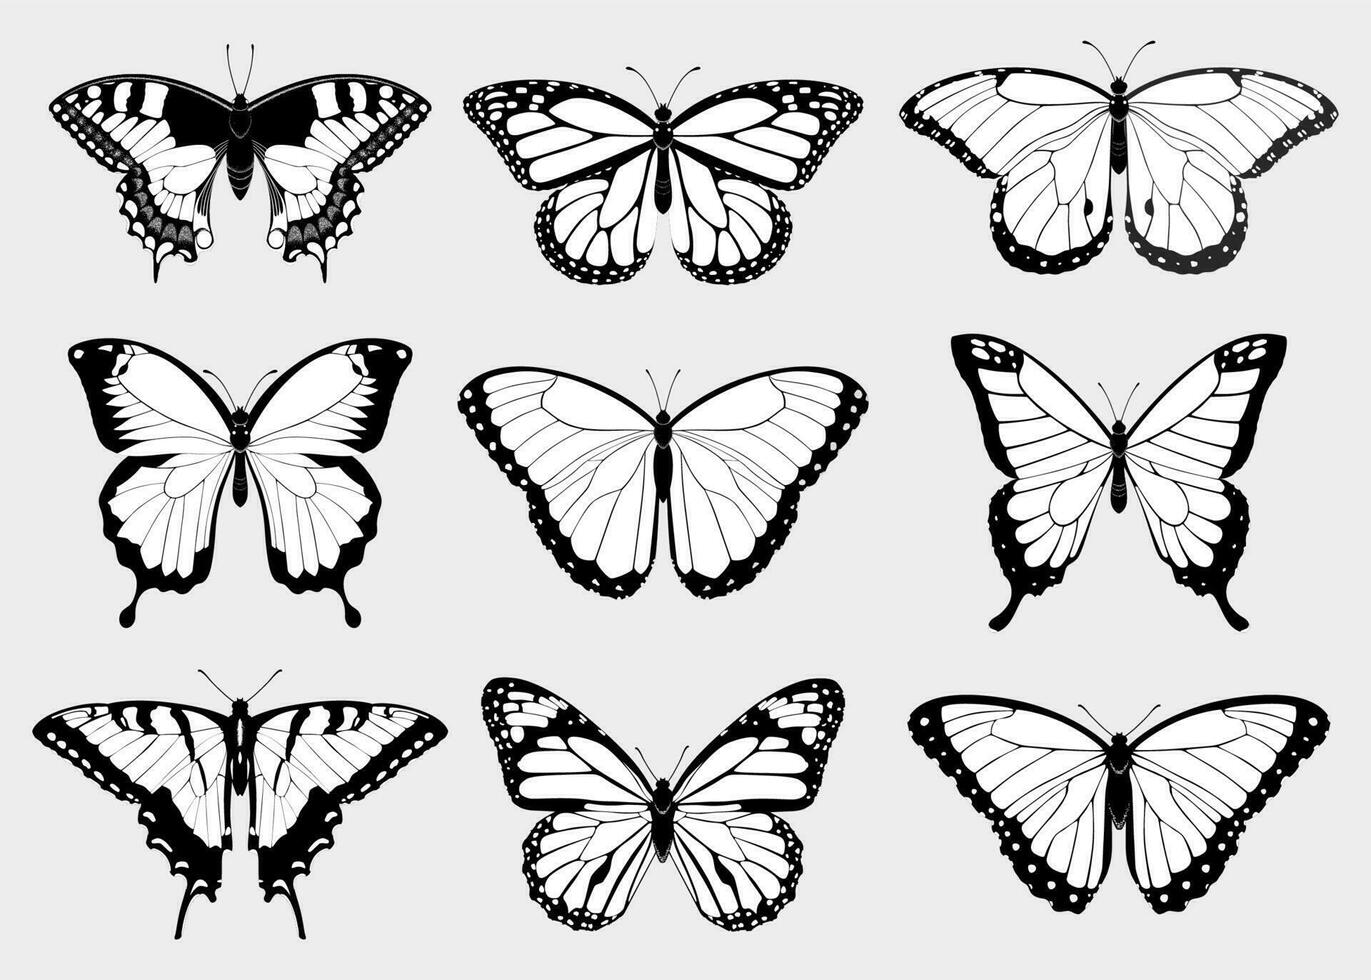 Isolated vector collection of top view black and white butterfly silhouettes